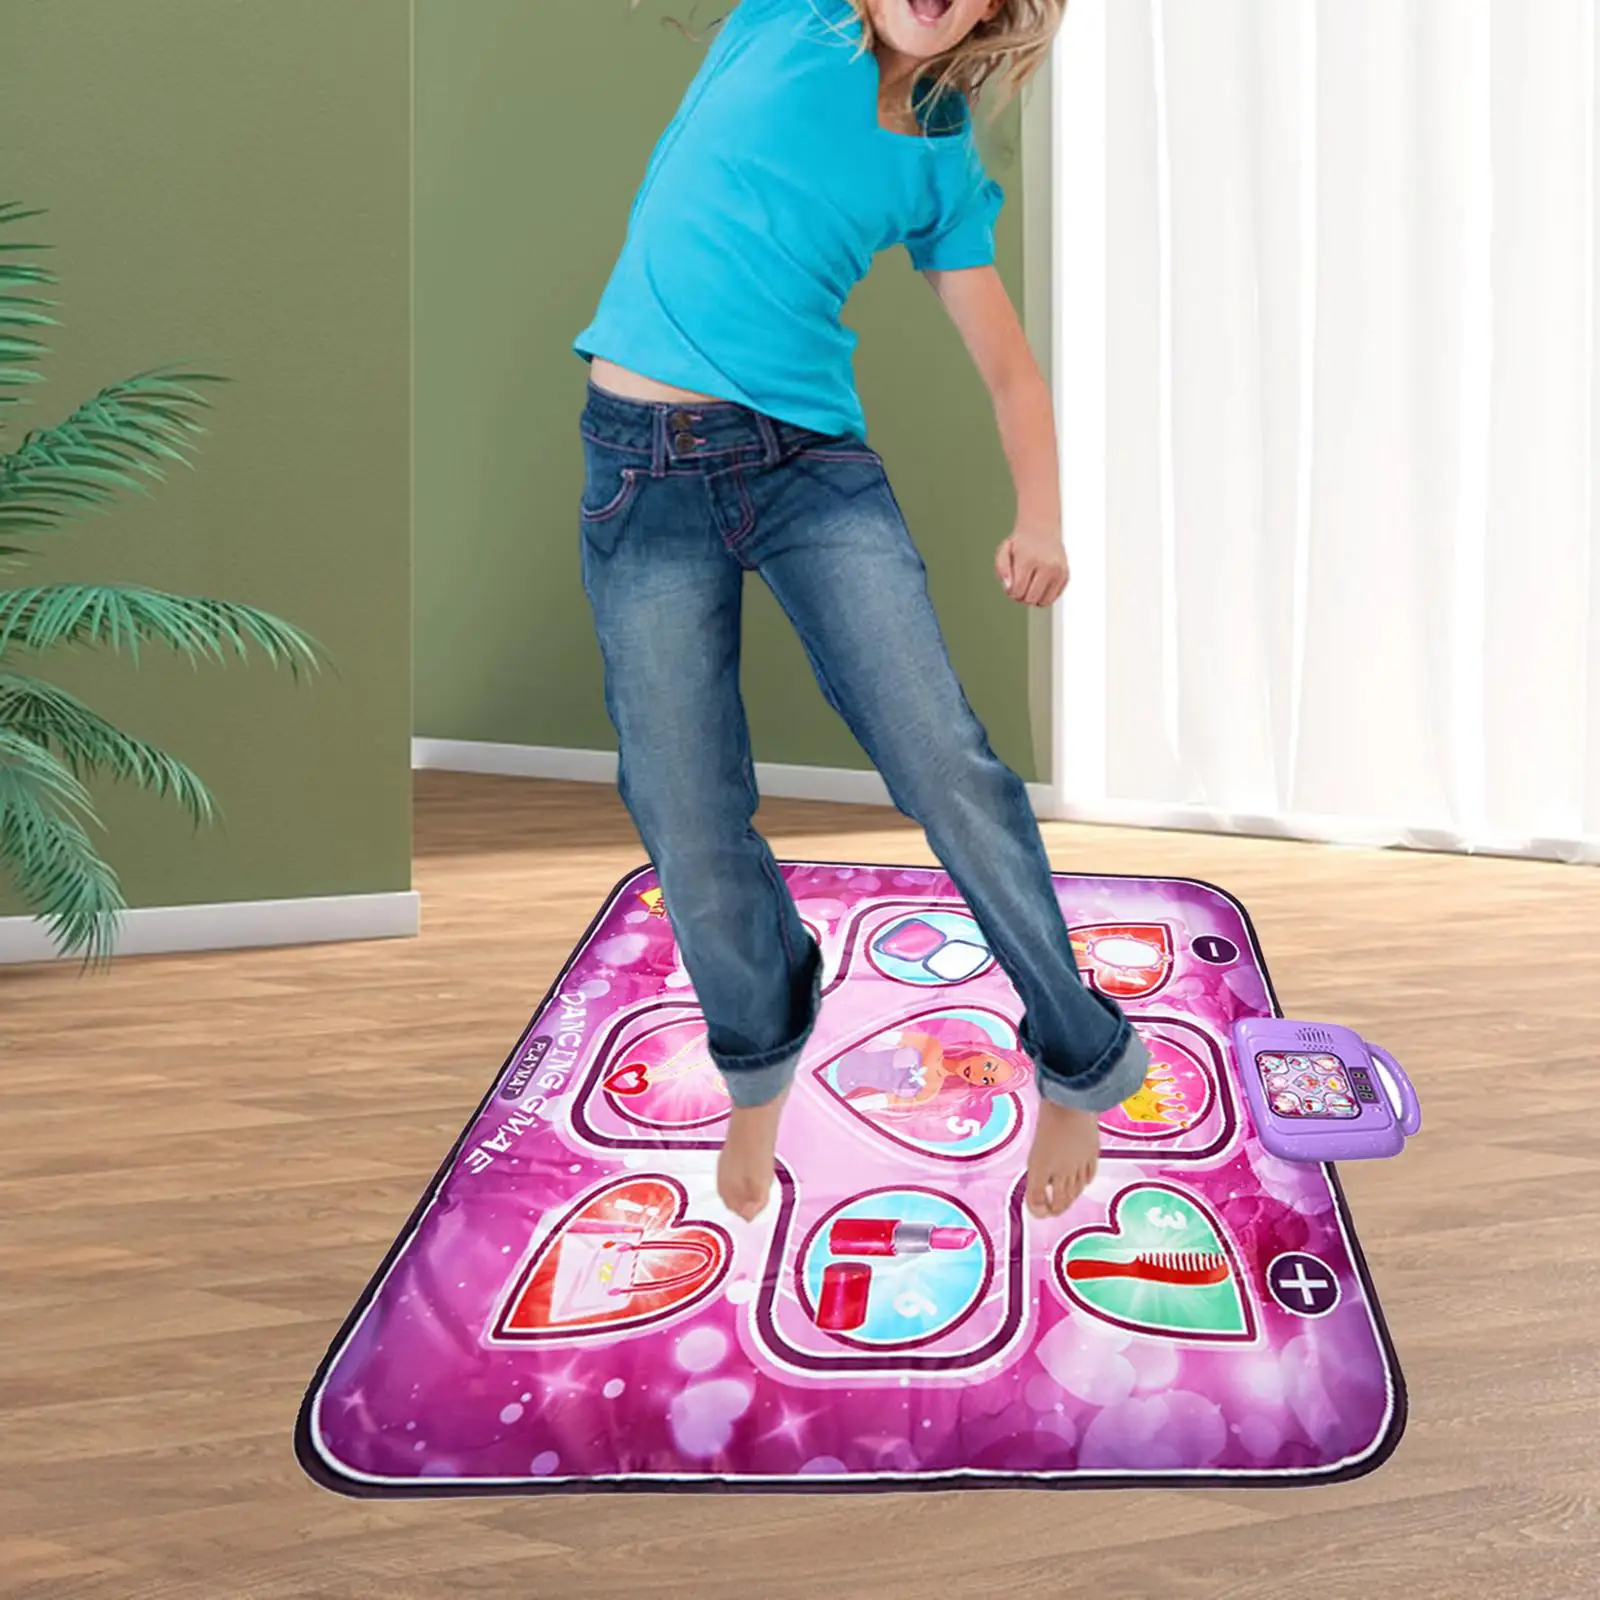 Dance Mat Portable Rhythm Play Mat Dancing Blanket Fitness Pad Dancing Game Playmat for Adults Toddlers Kids Children Boys